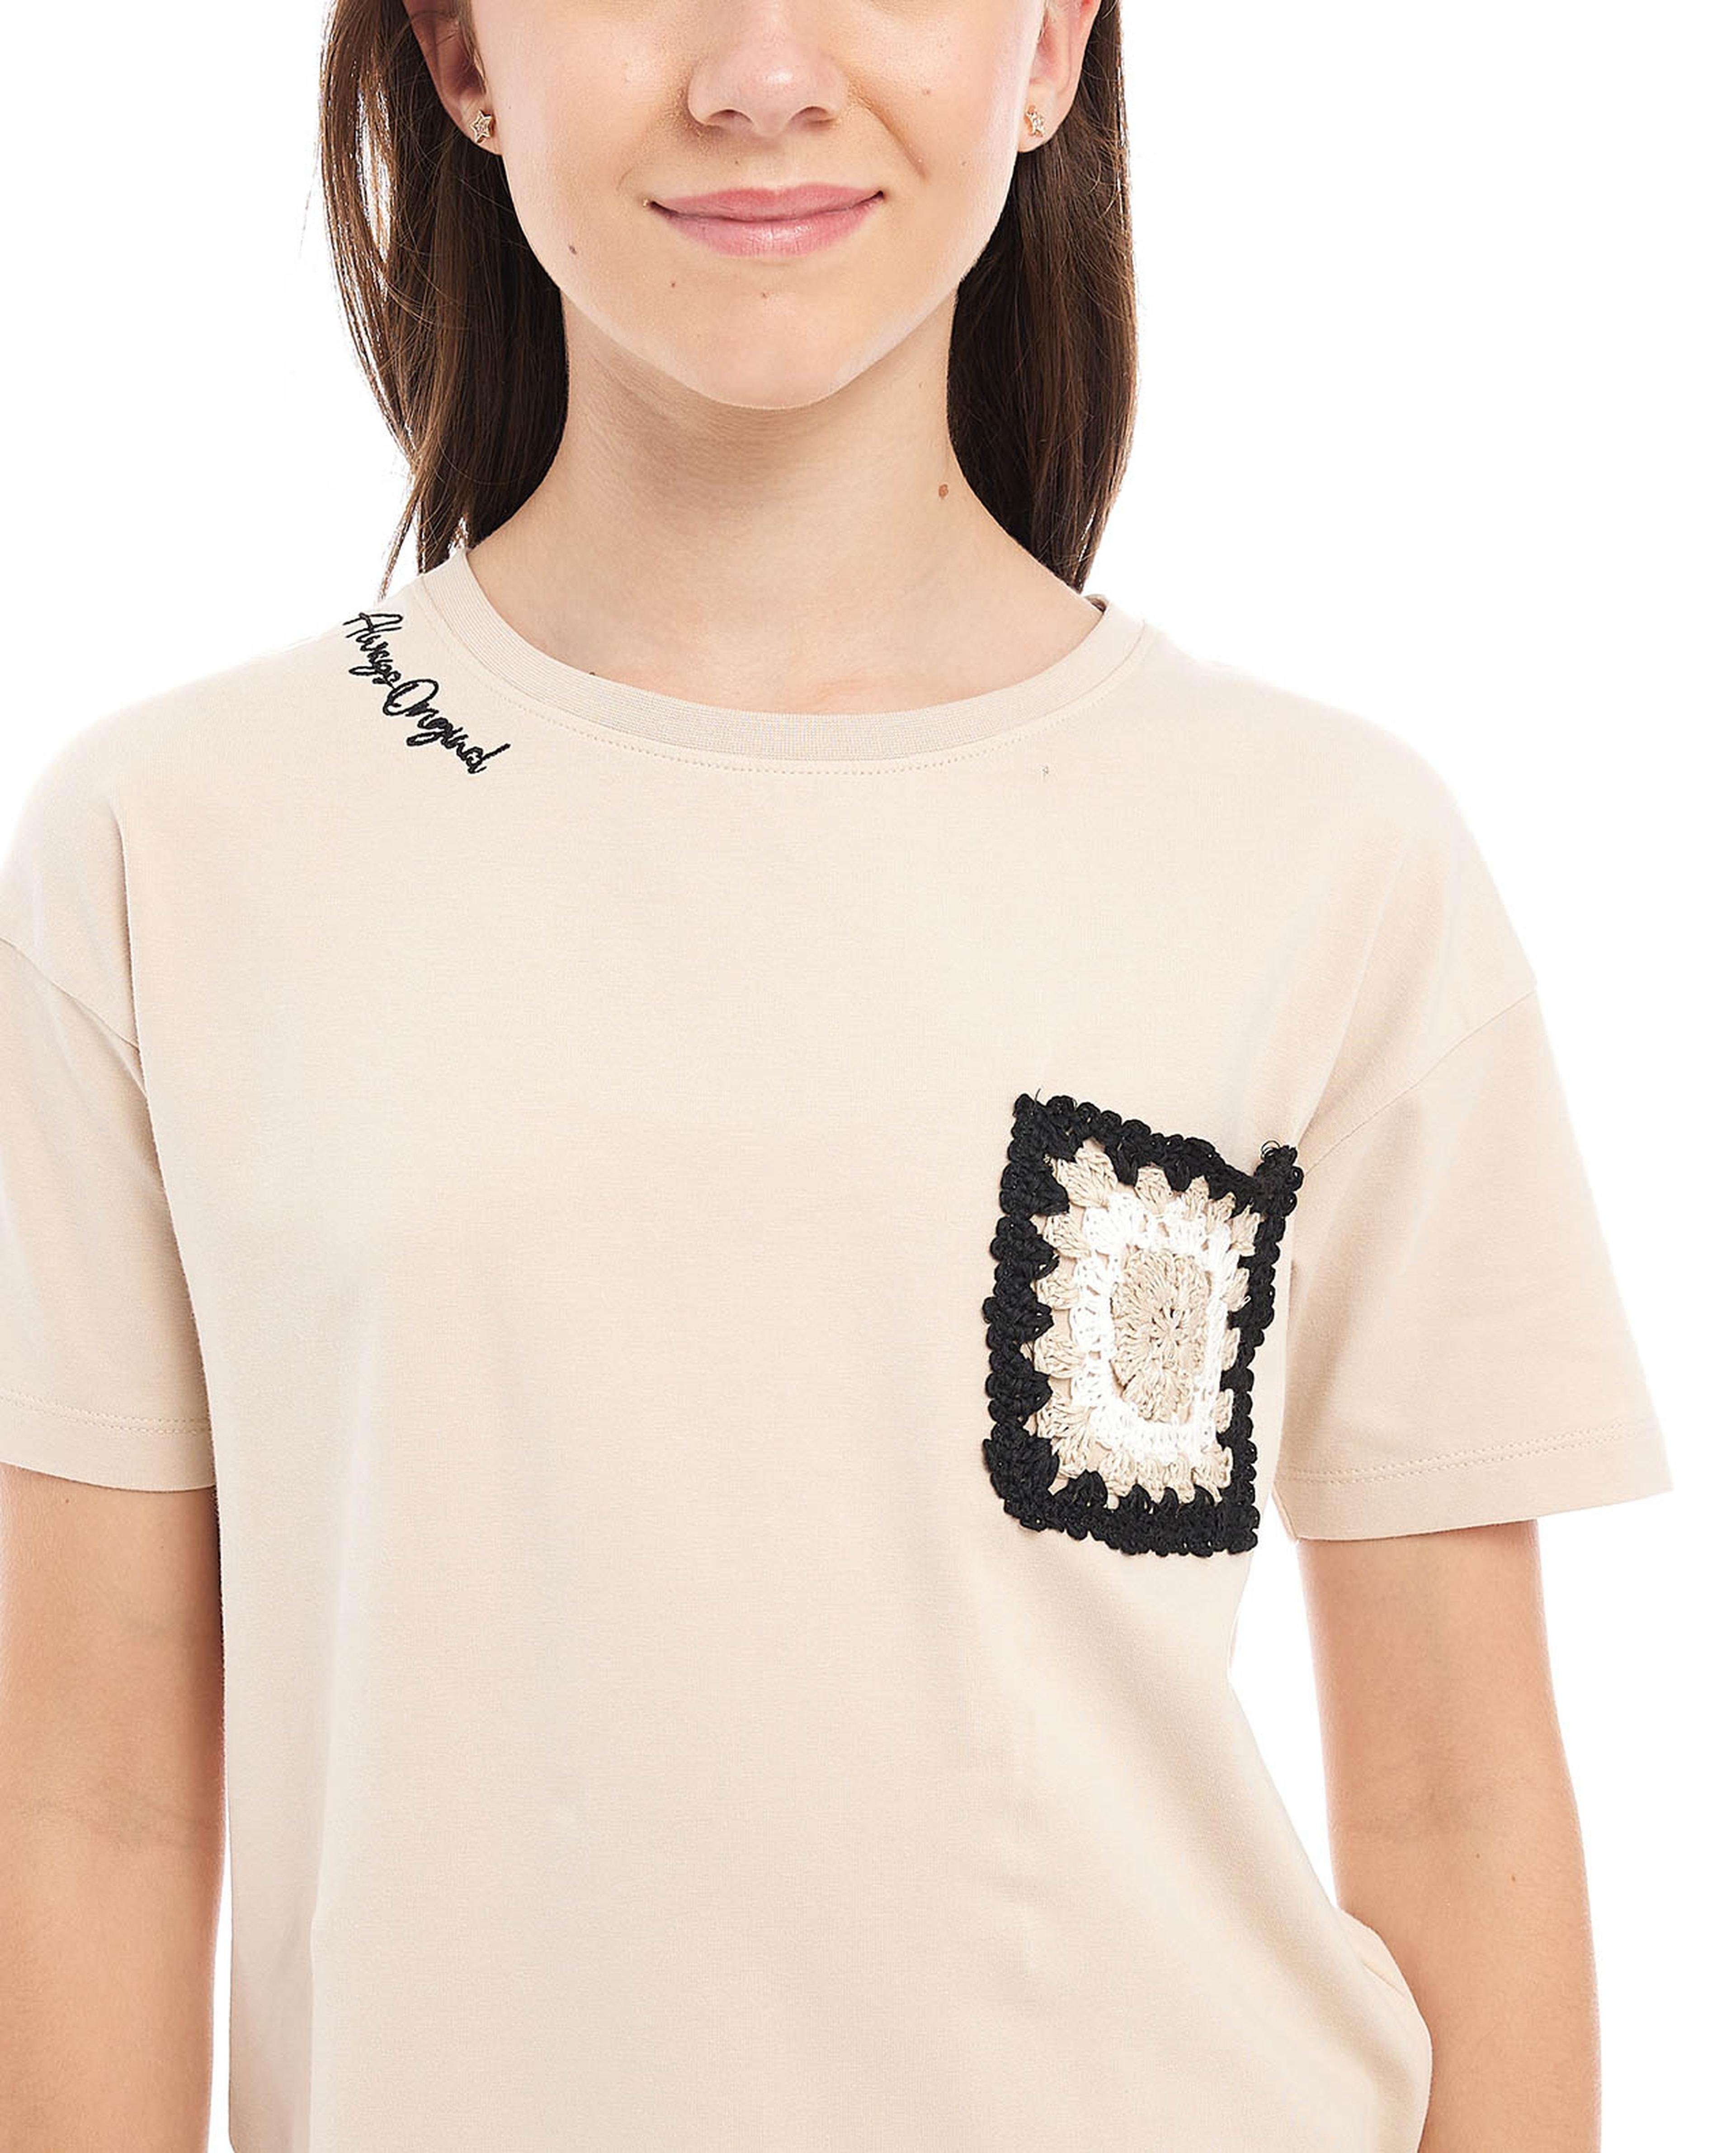 Crochet Detail T-Shirt with Crew Neck and Short Sleeves